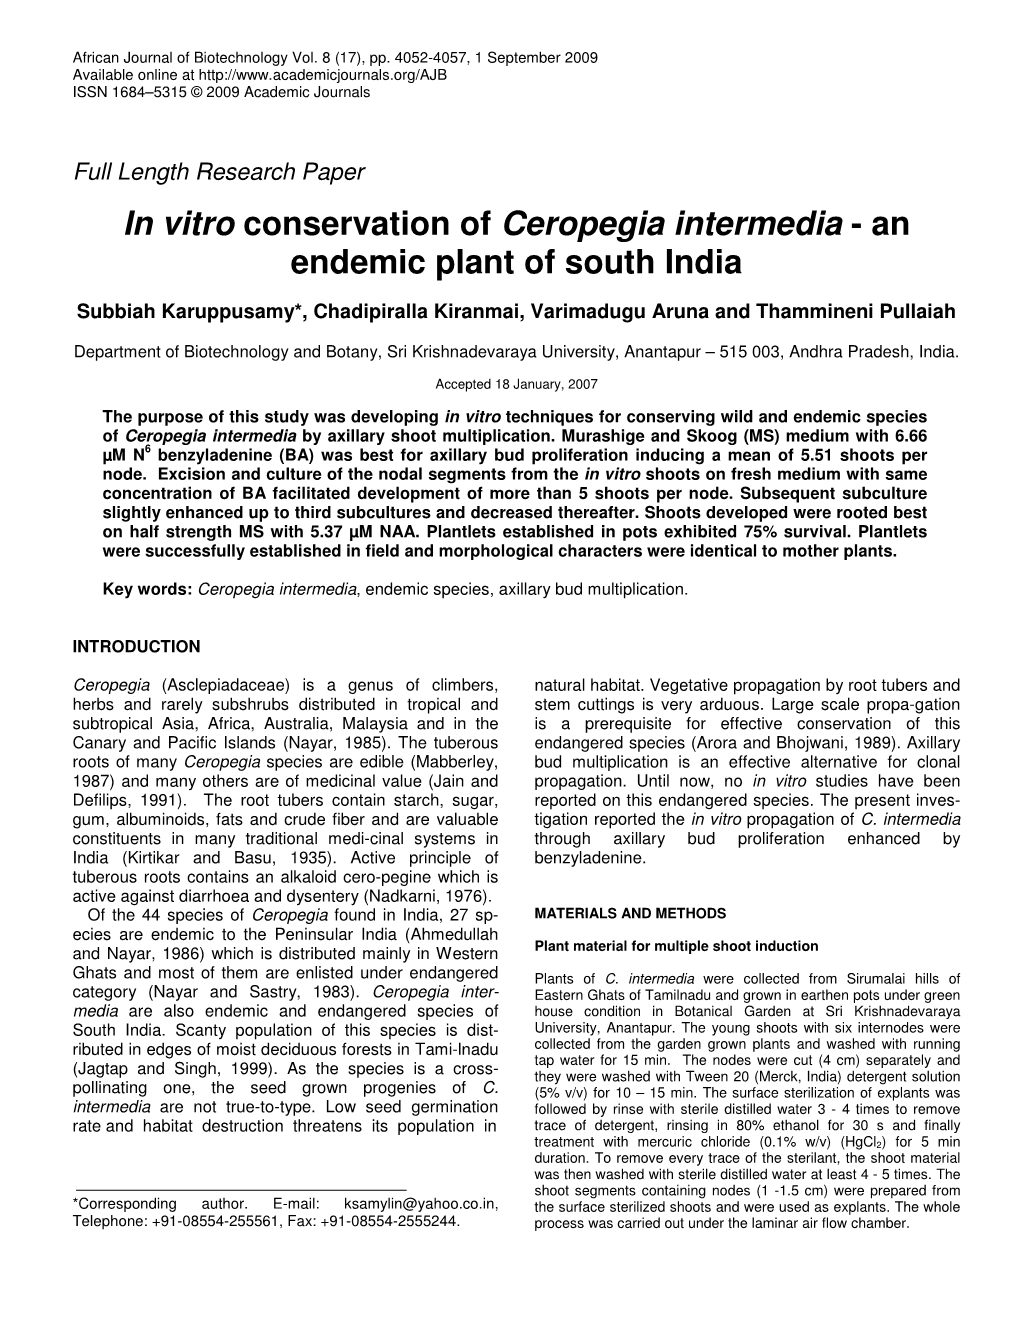 In Vitro Conservation of Ceropegia Intermedia - an Endemic Plant of South India